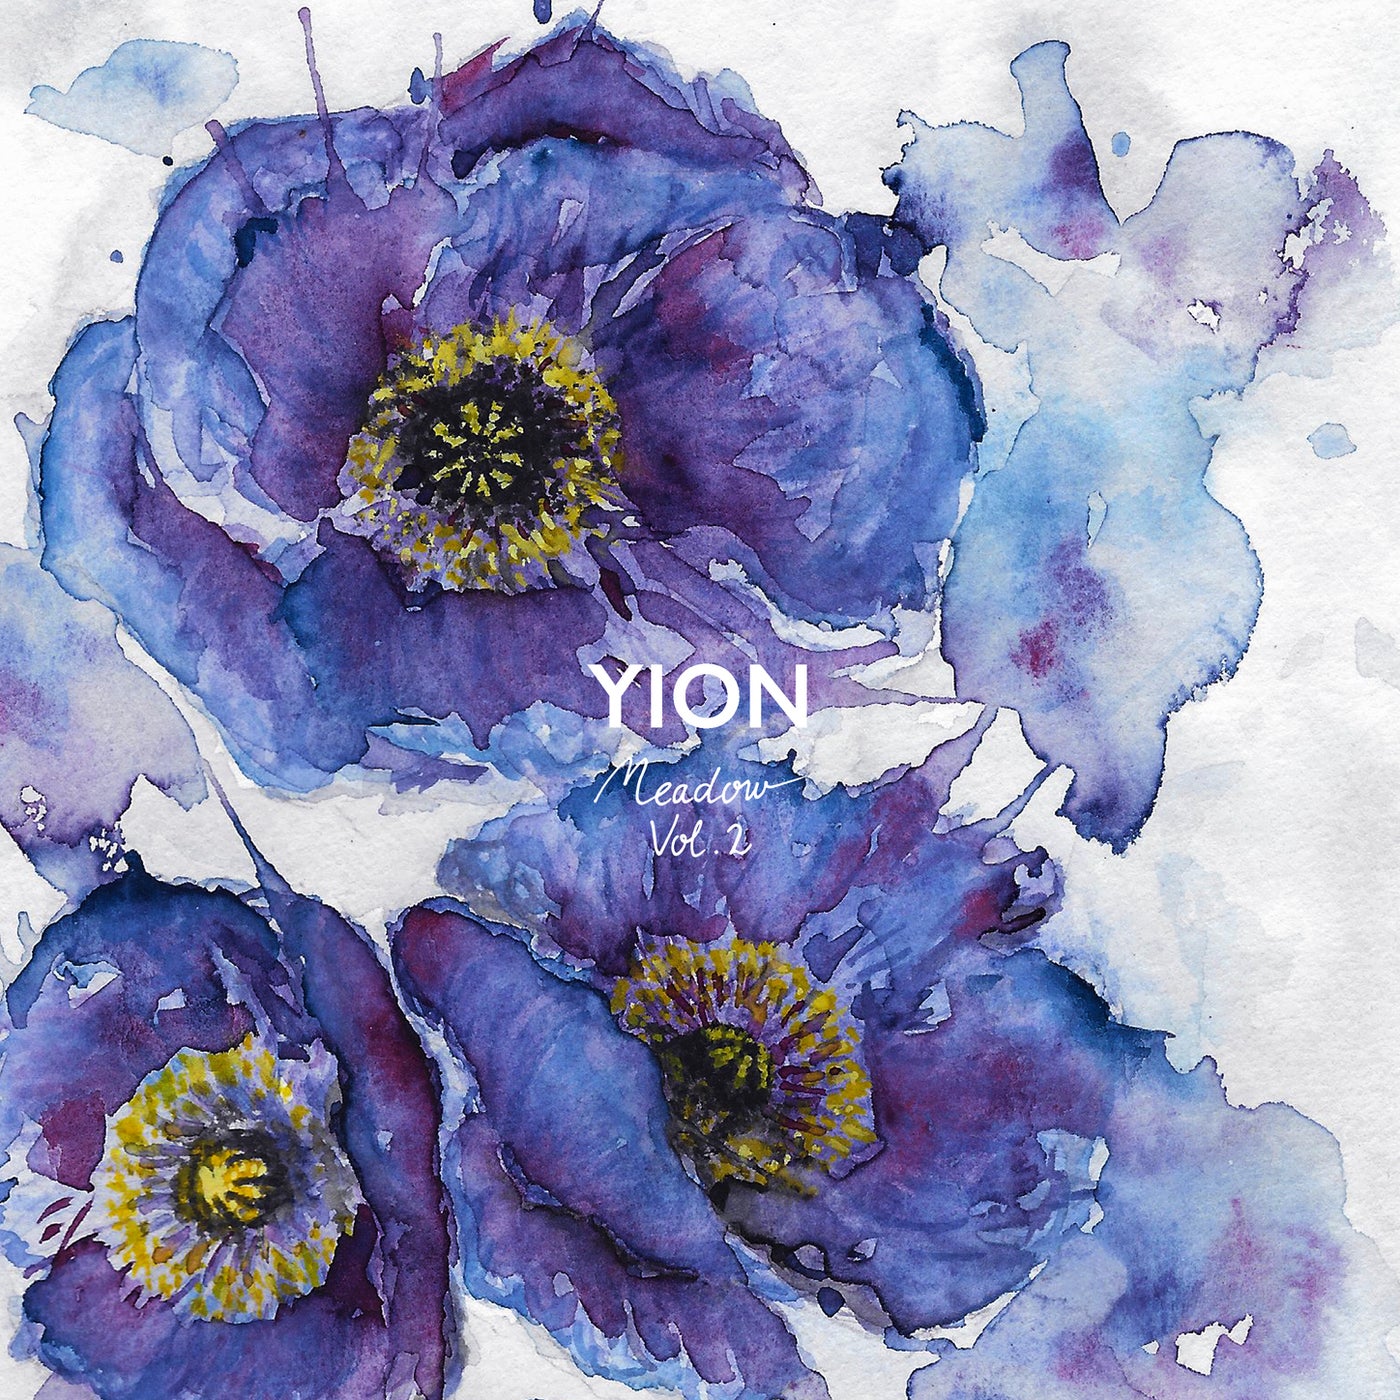 image cover: VA - Meadow, Vol. 2 / YION018